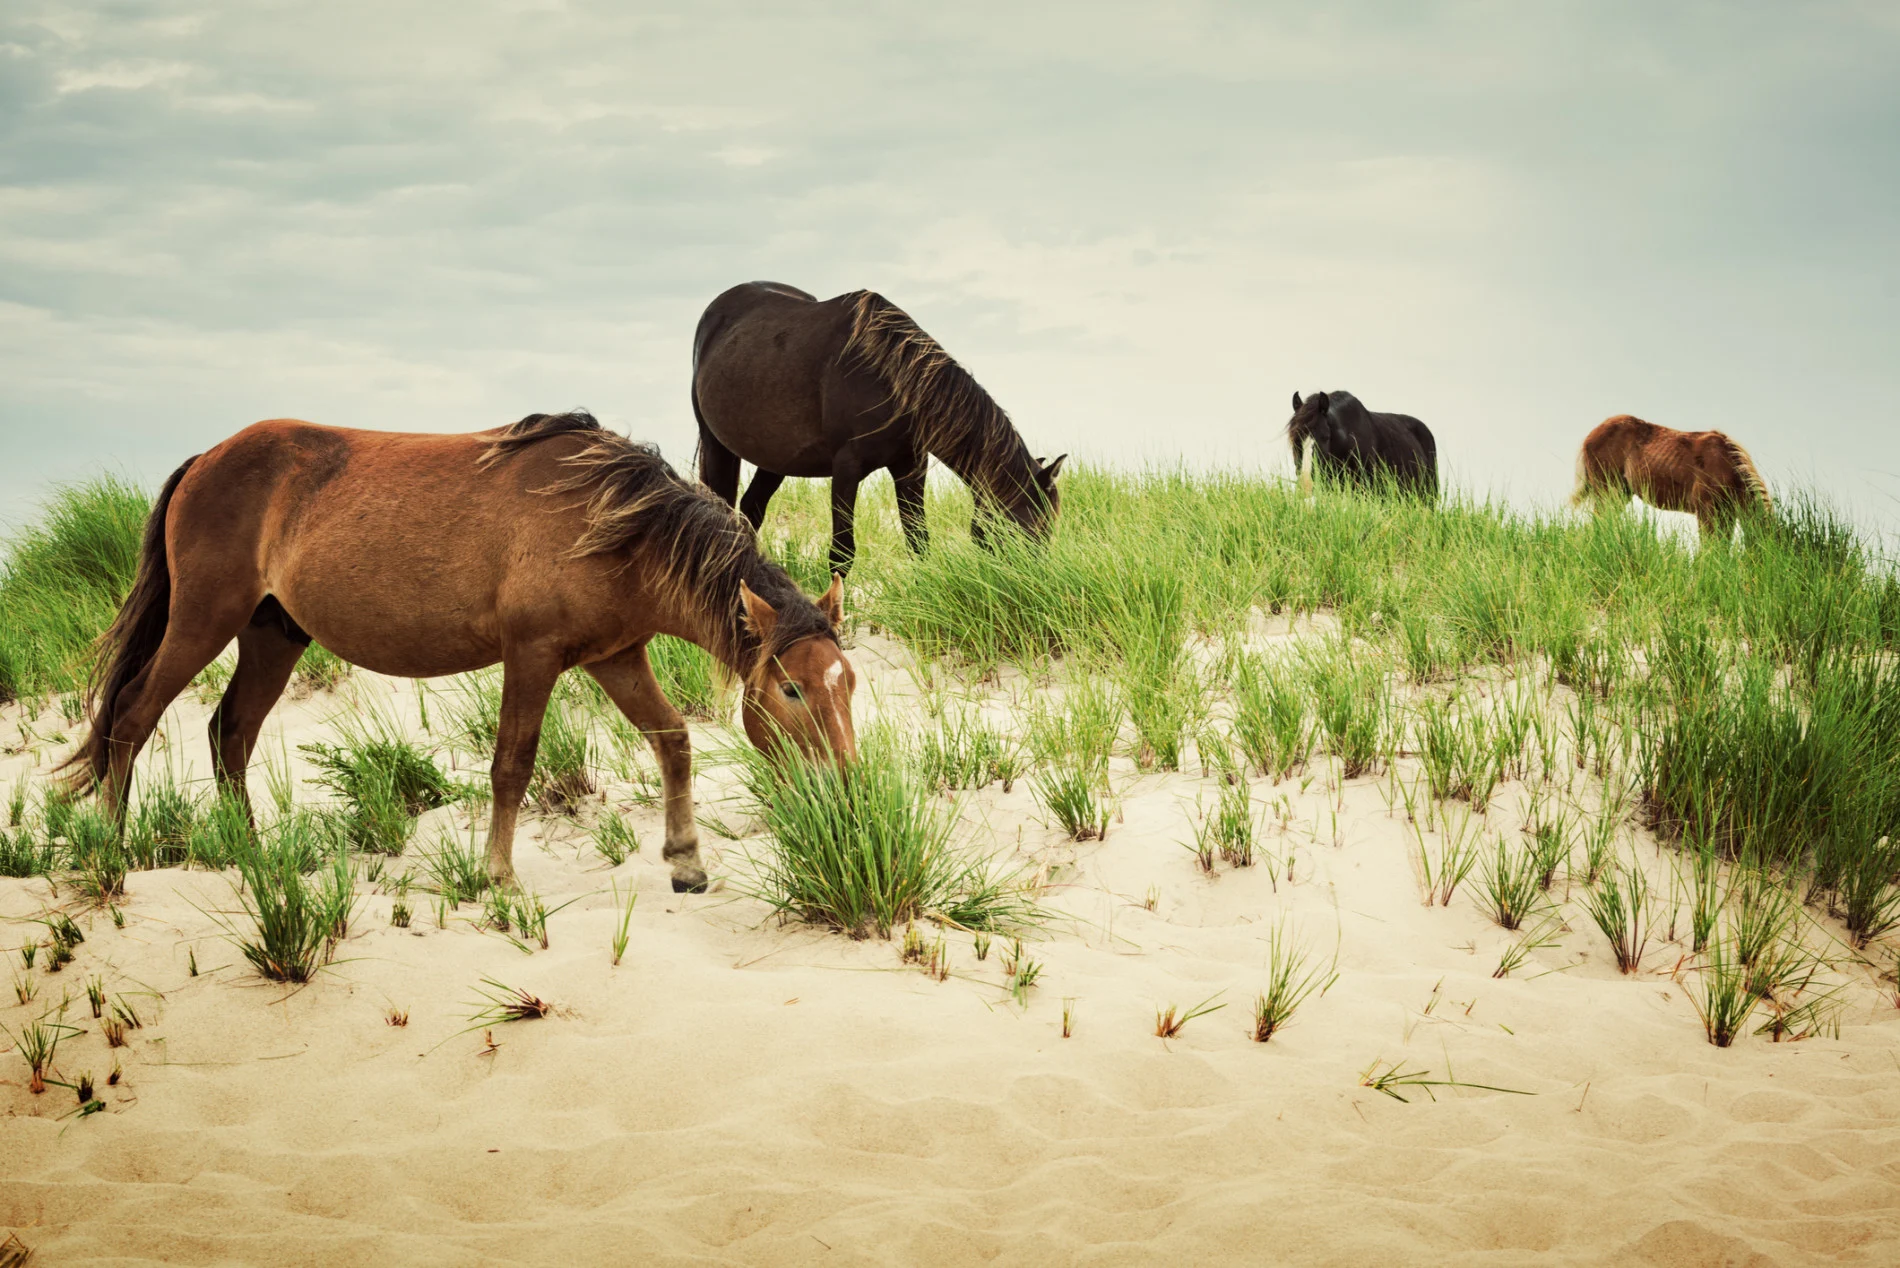 sable island Credit: Jewelsy. iStock / Getty Images Plus